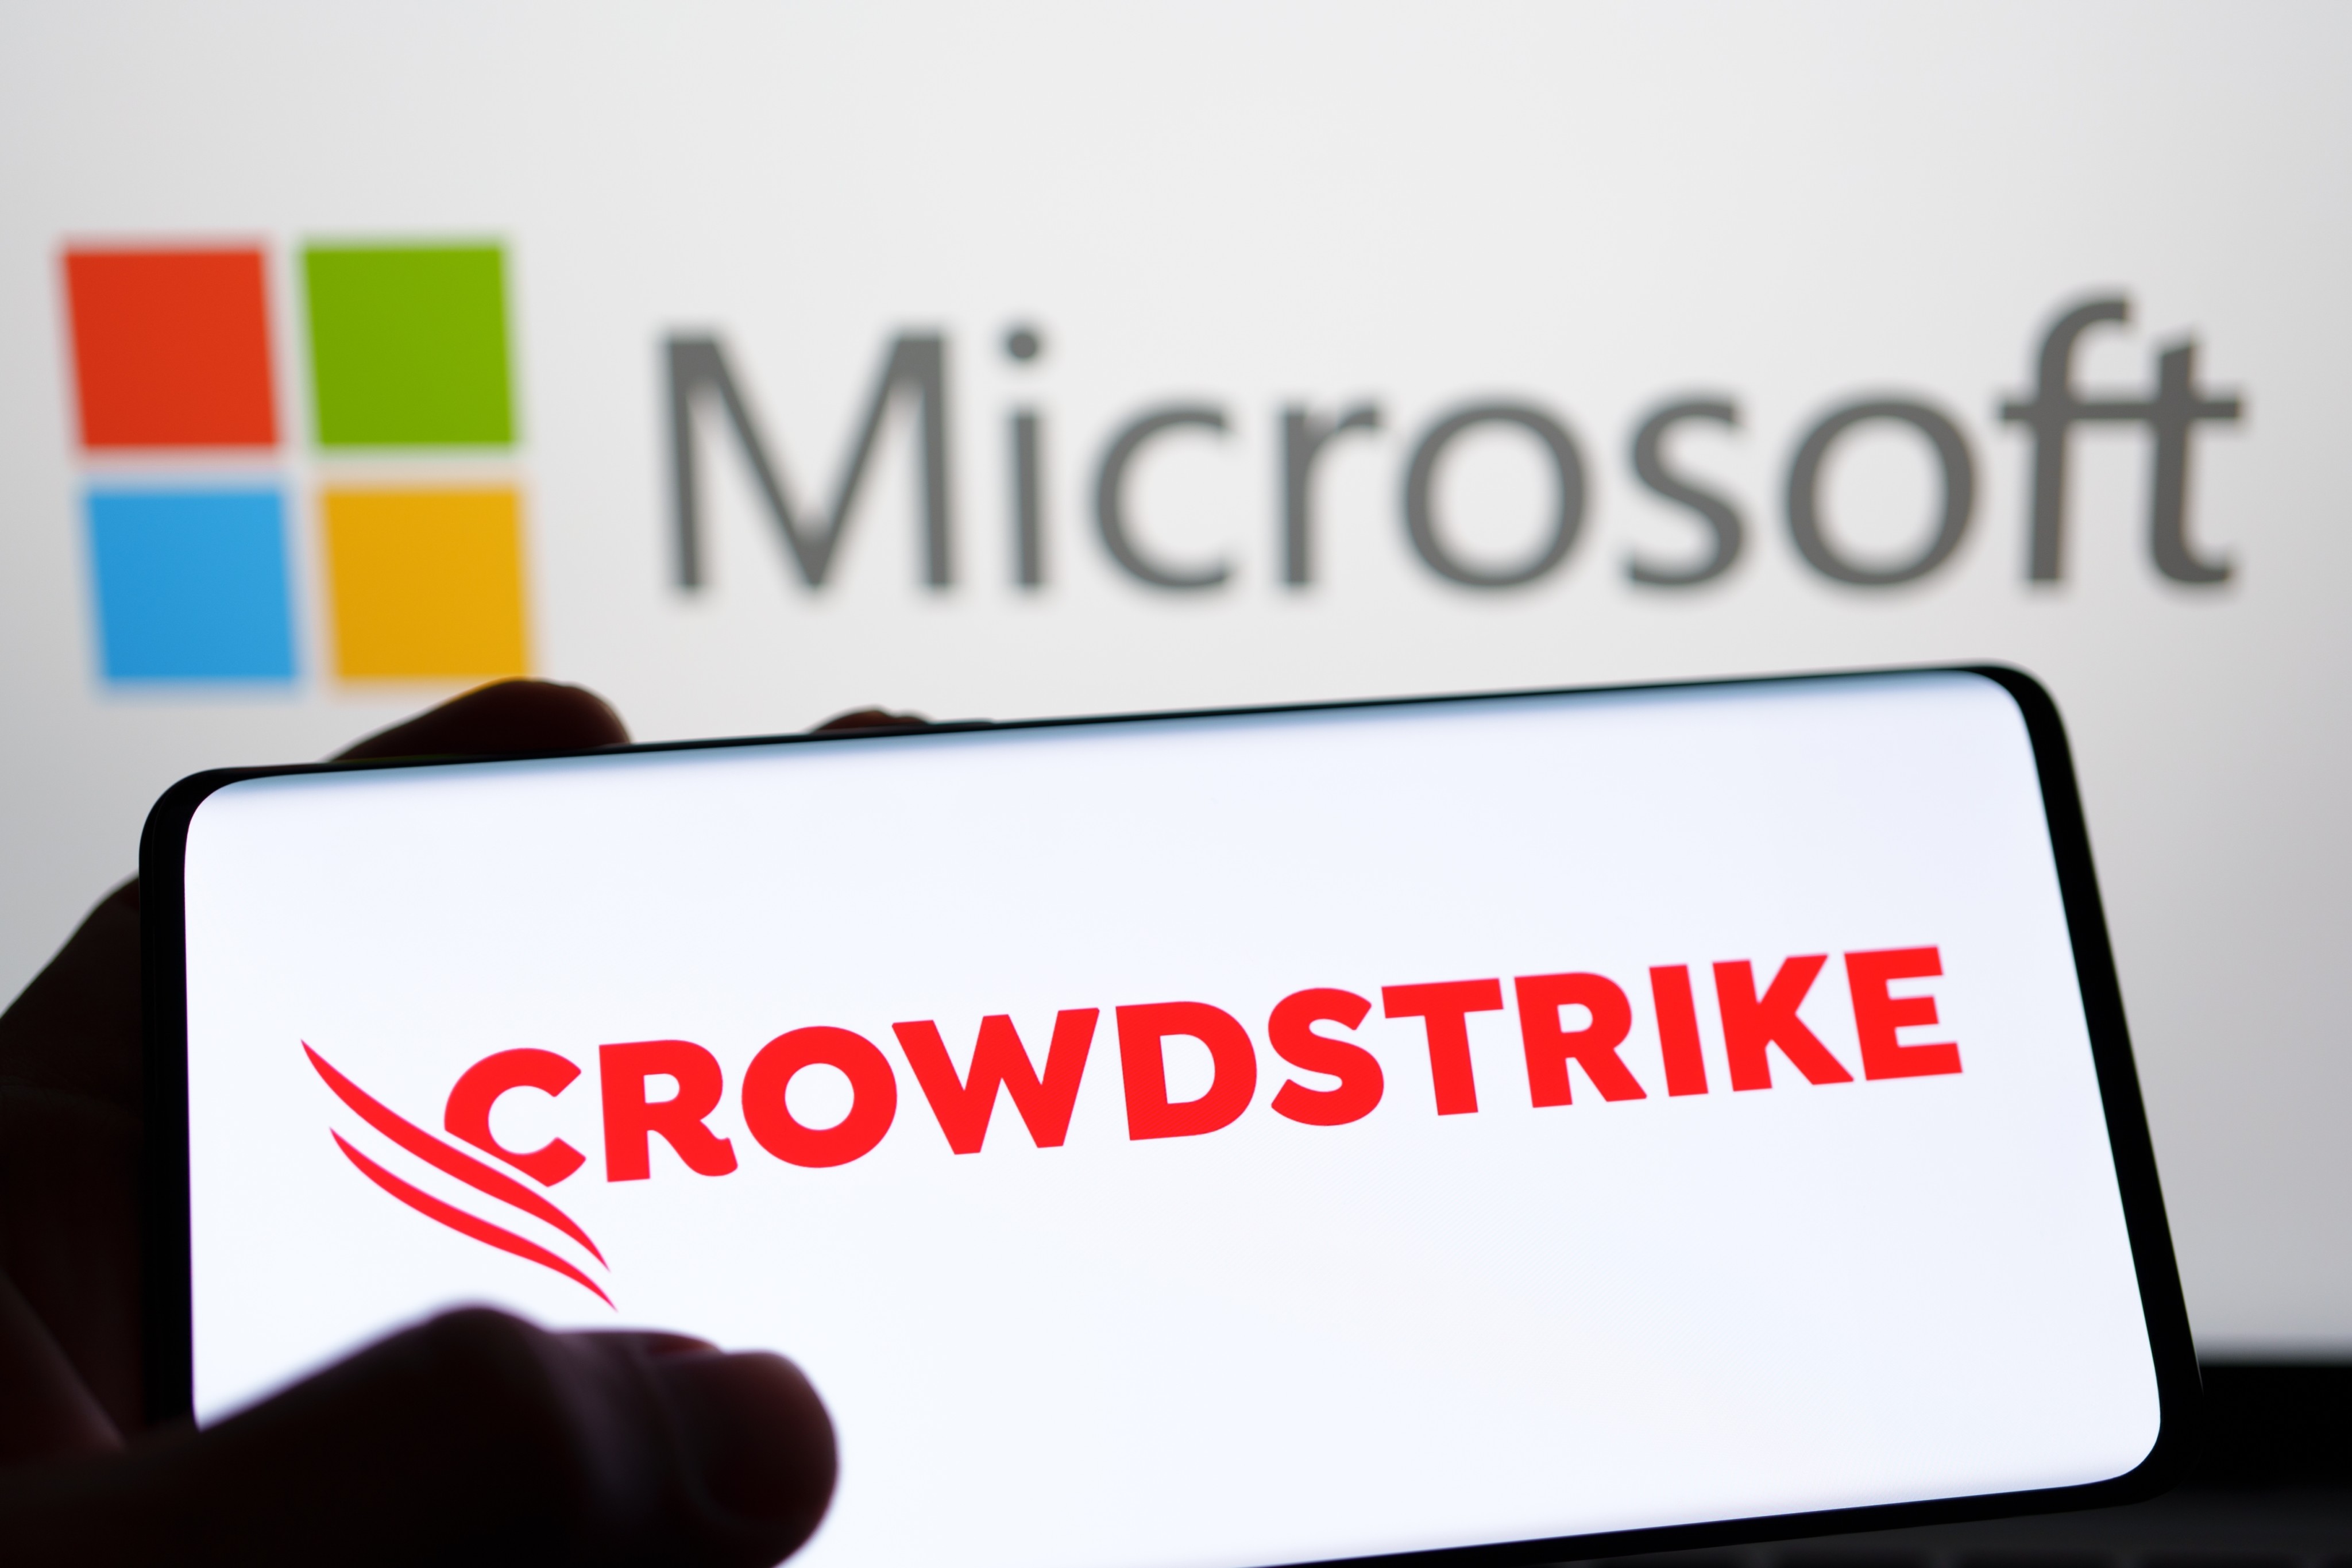 CrowdStrike quickly developed a fix for the problem, but the impact was still being felt days later. Photo: Shutterstock